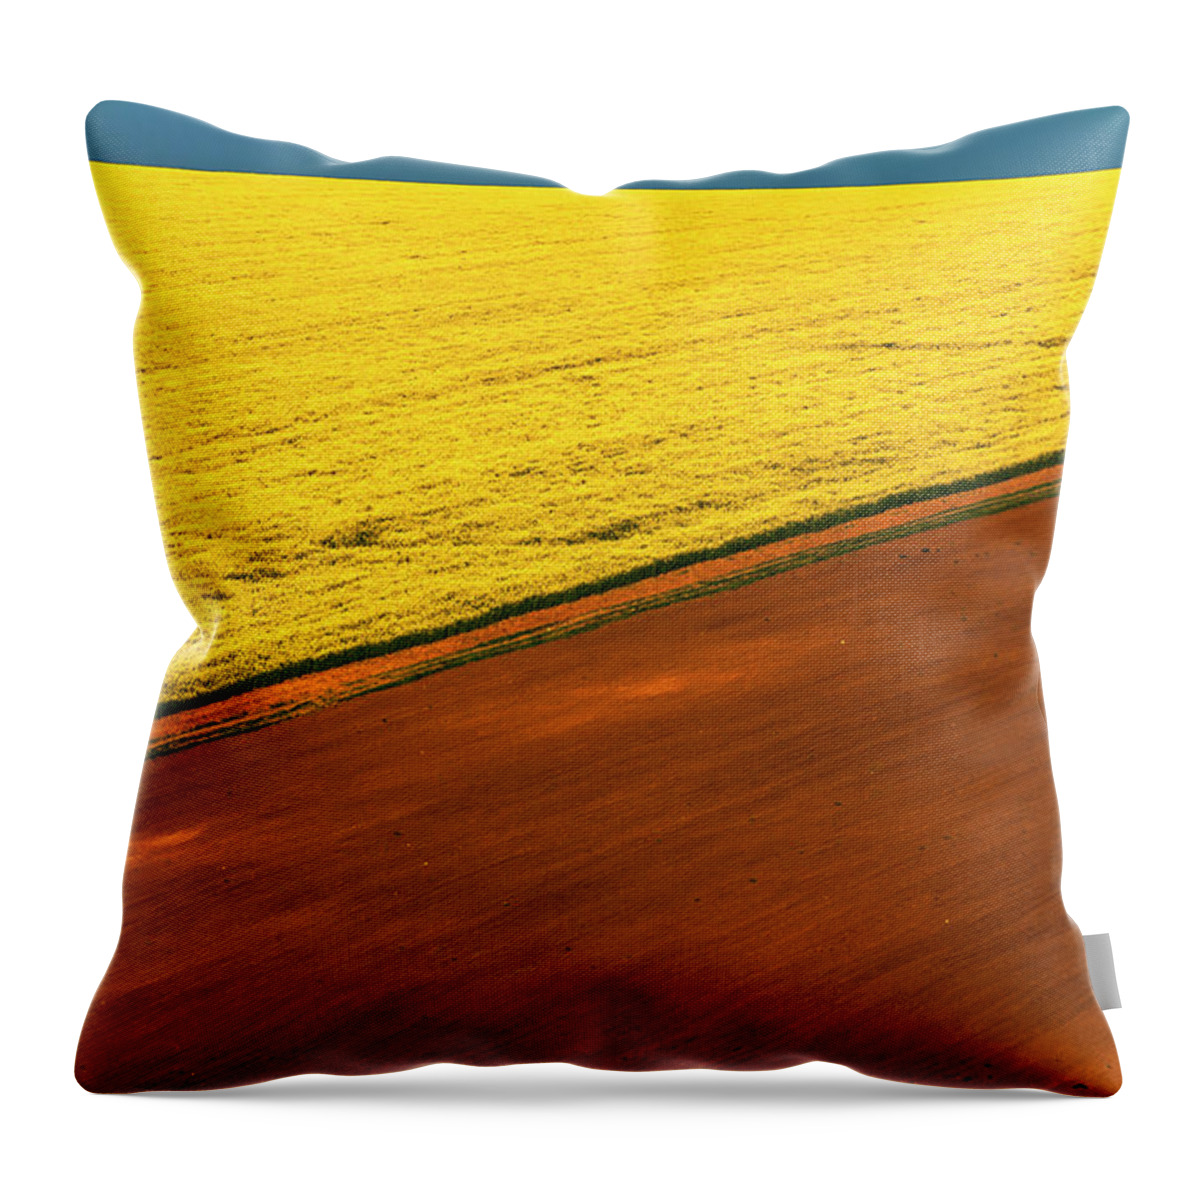 Bulgaria Throw Pillow featuring the photograph Diagonals by Evgeni Dinev